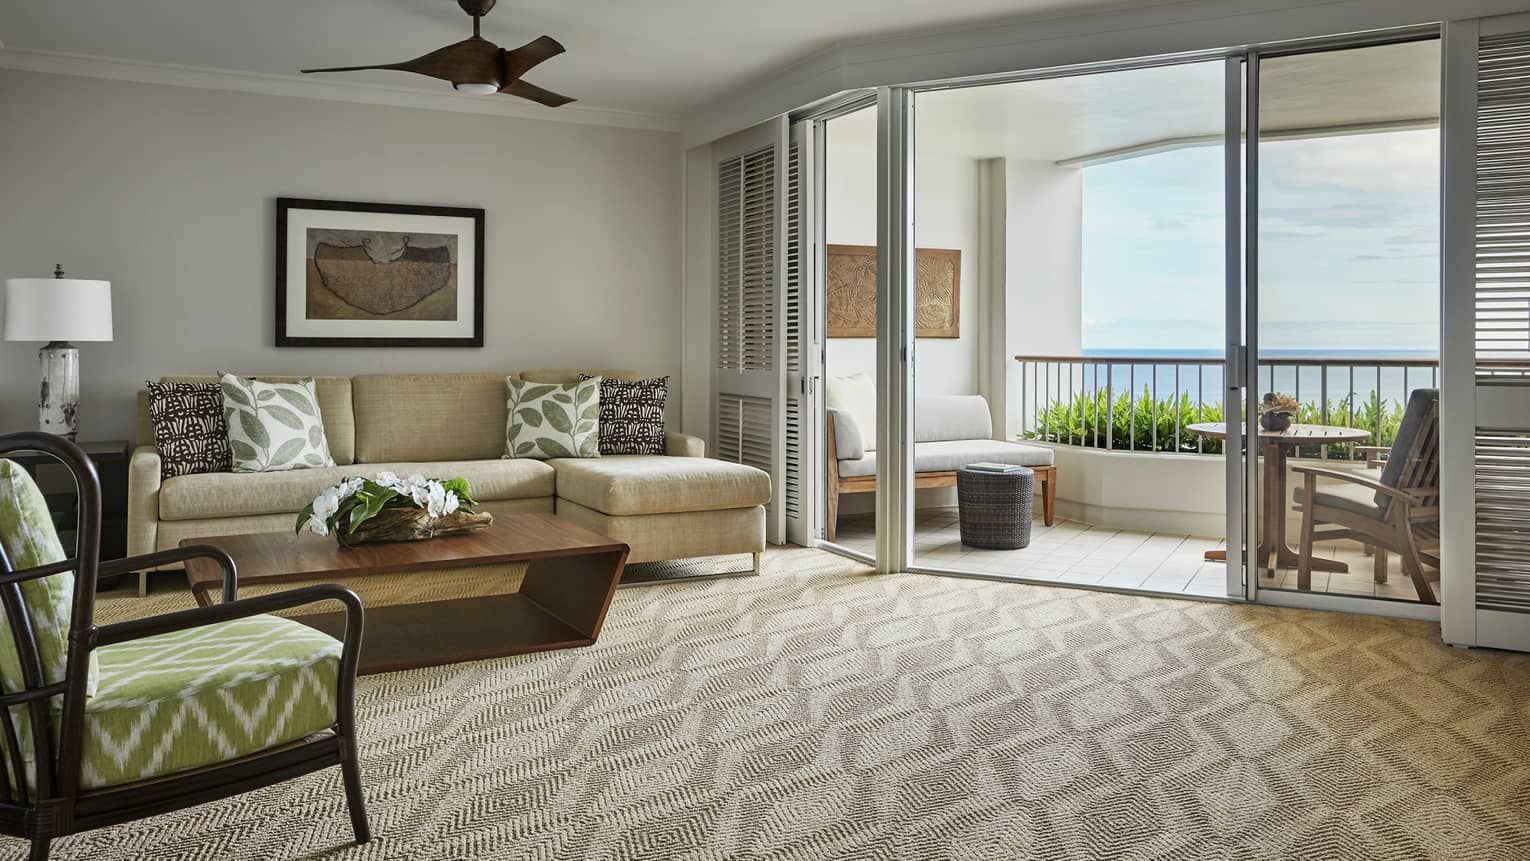 Oceanfront Suite living room with L-shaped sofa, chair on carpet, shutters on patio door